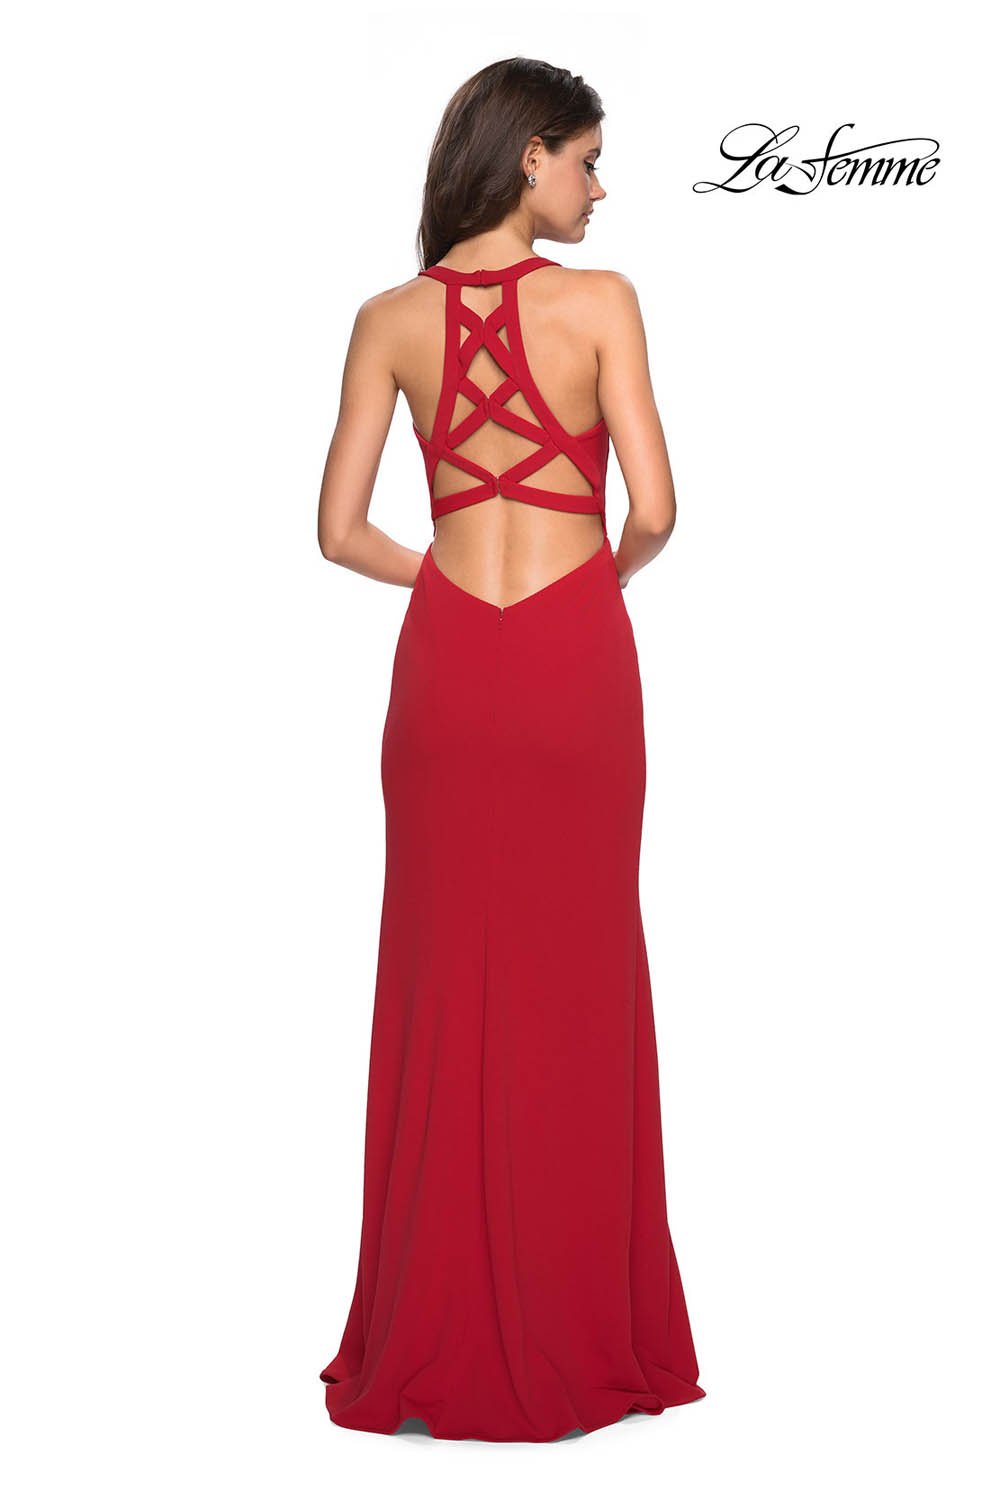 La Femme 26997 dress images in these colors: Black, Red, White.